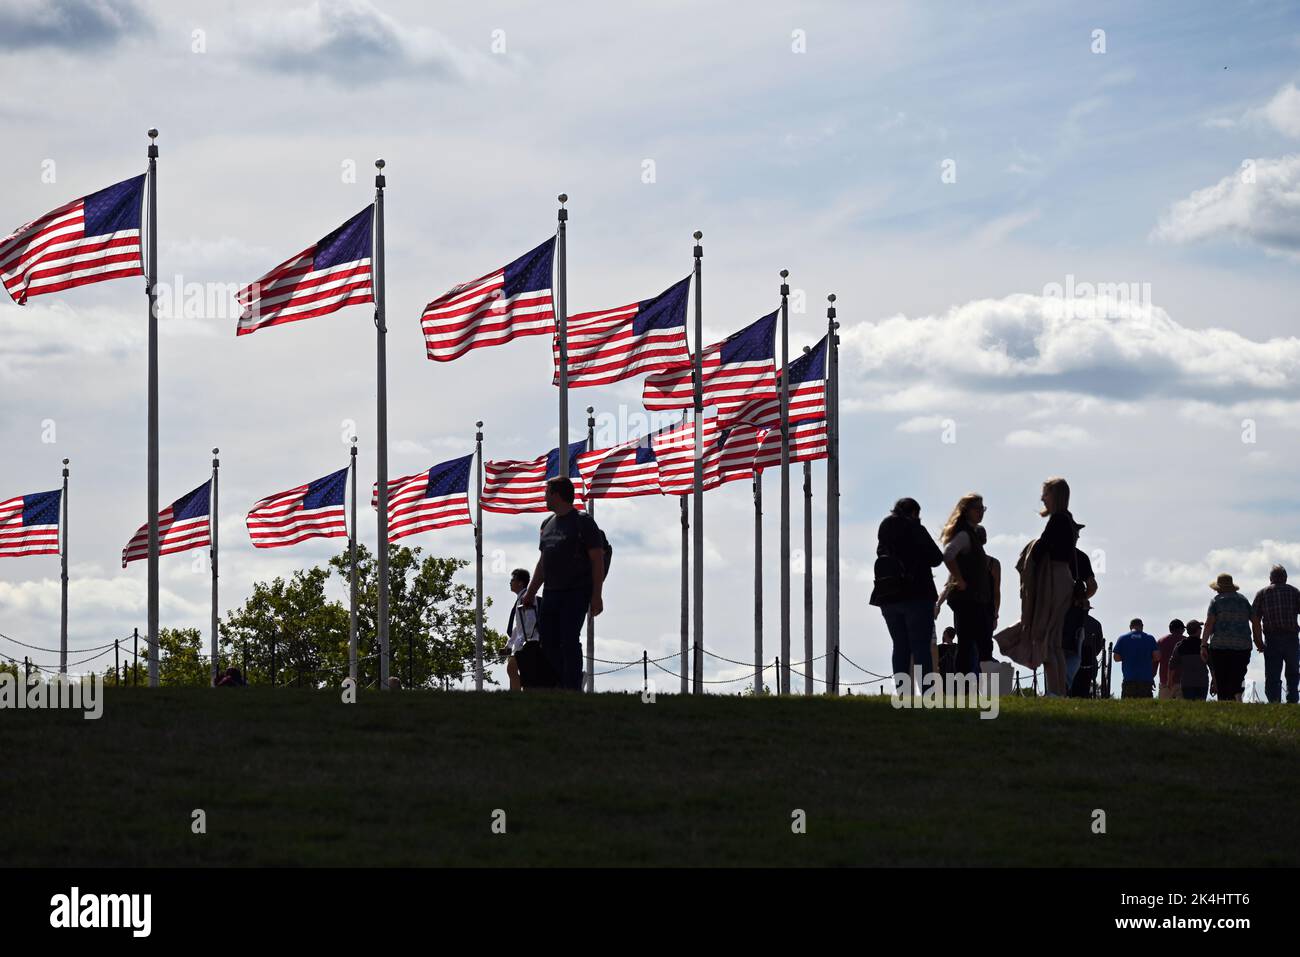 Tourists are silhouetted as they walk past the flags that encircle the base of the Washington Monument in Washington, DC. Stock Photo